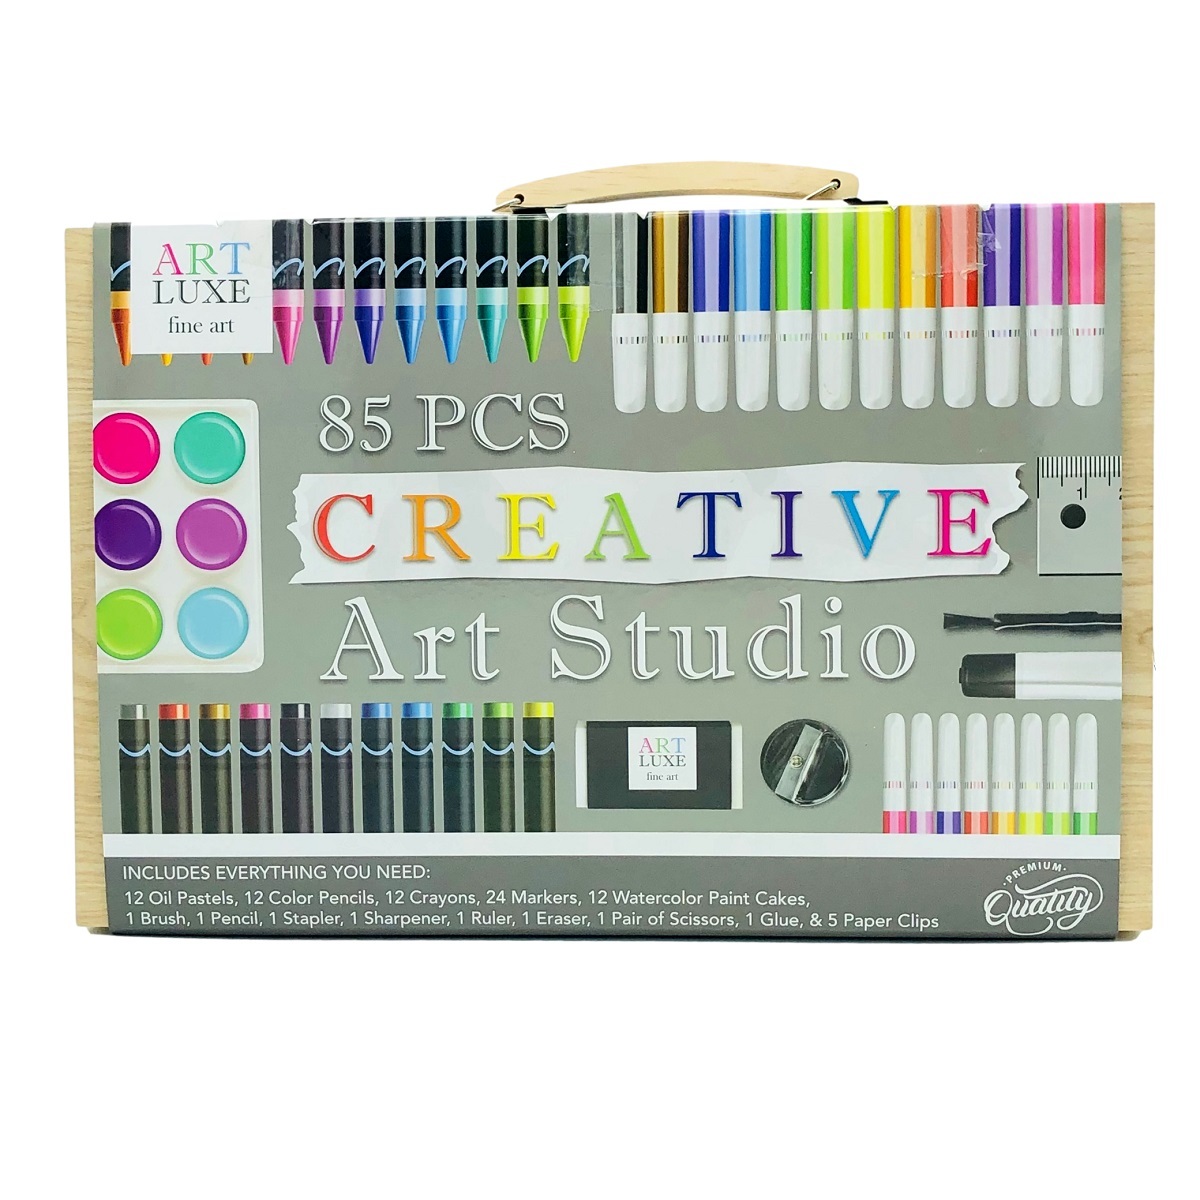 Premium Set of 12 Color Pencils for Artists and Creatives